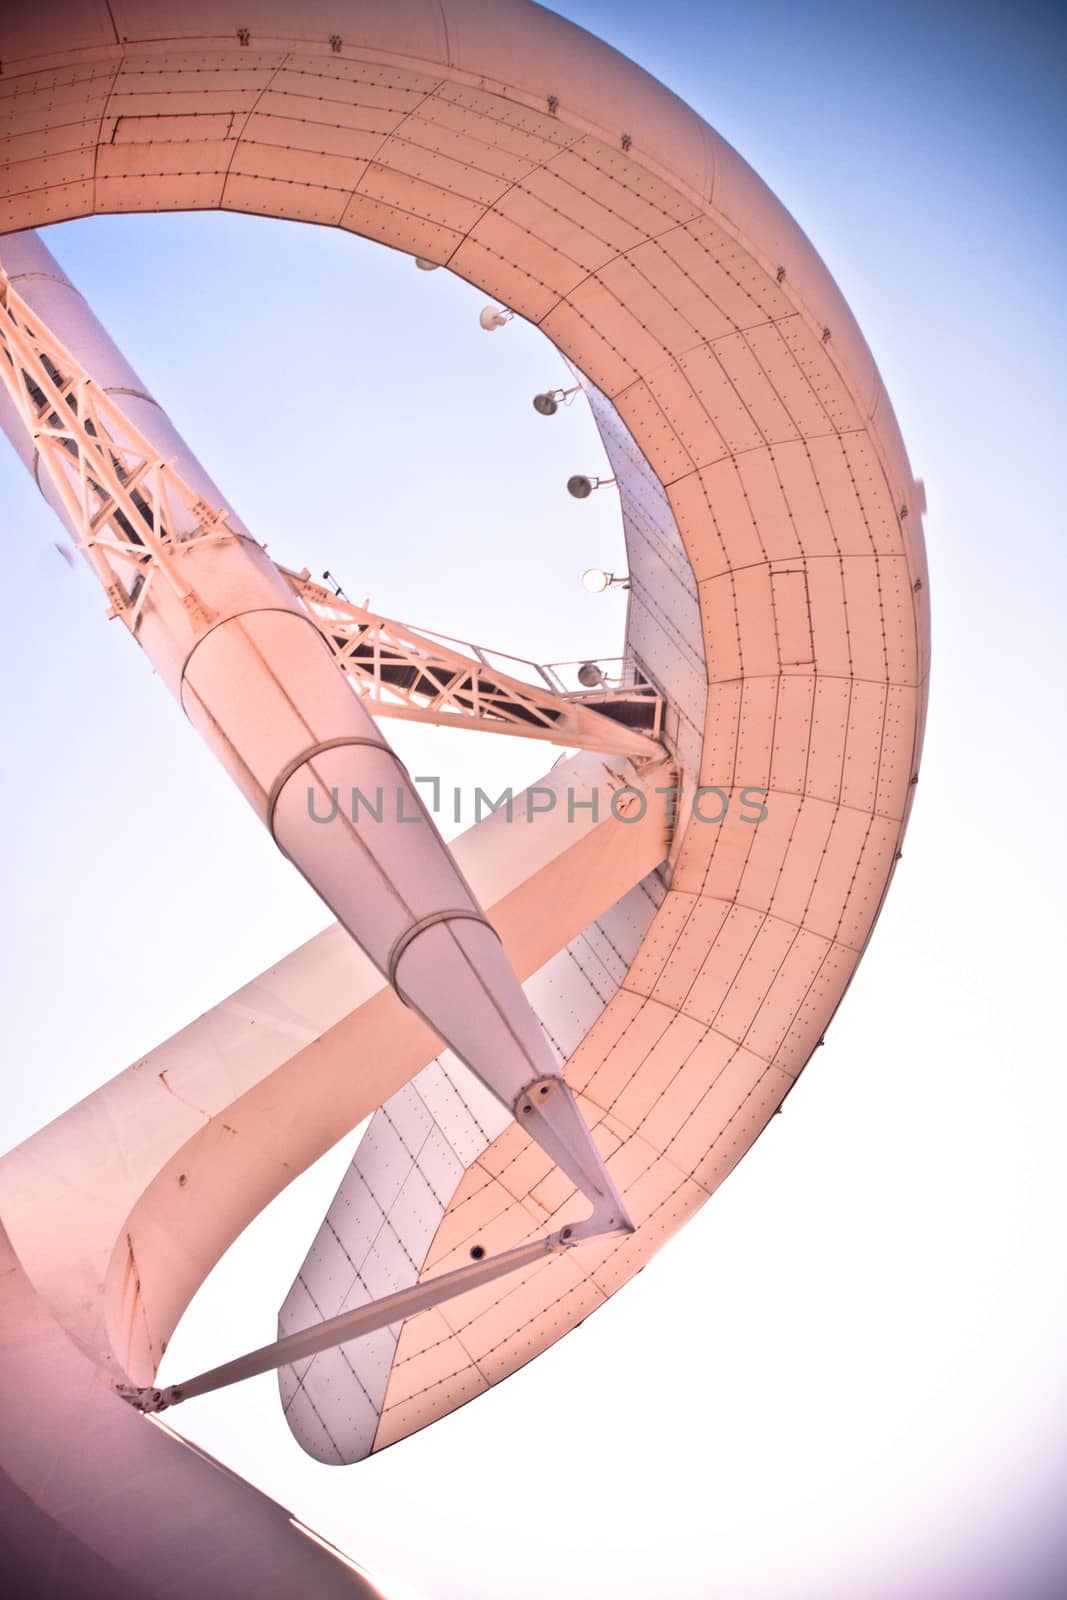 Detail of the Telecommunications Tower by jrstock